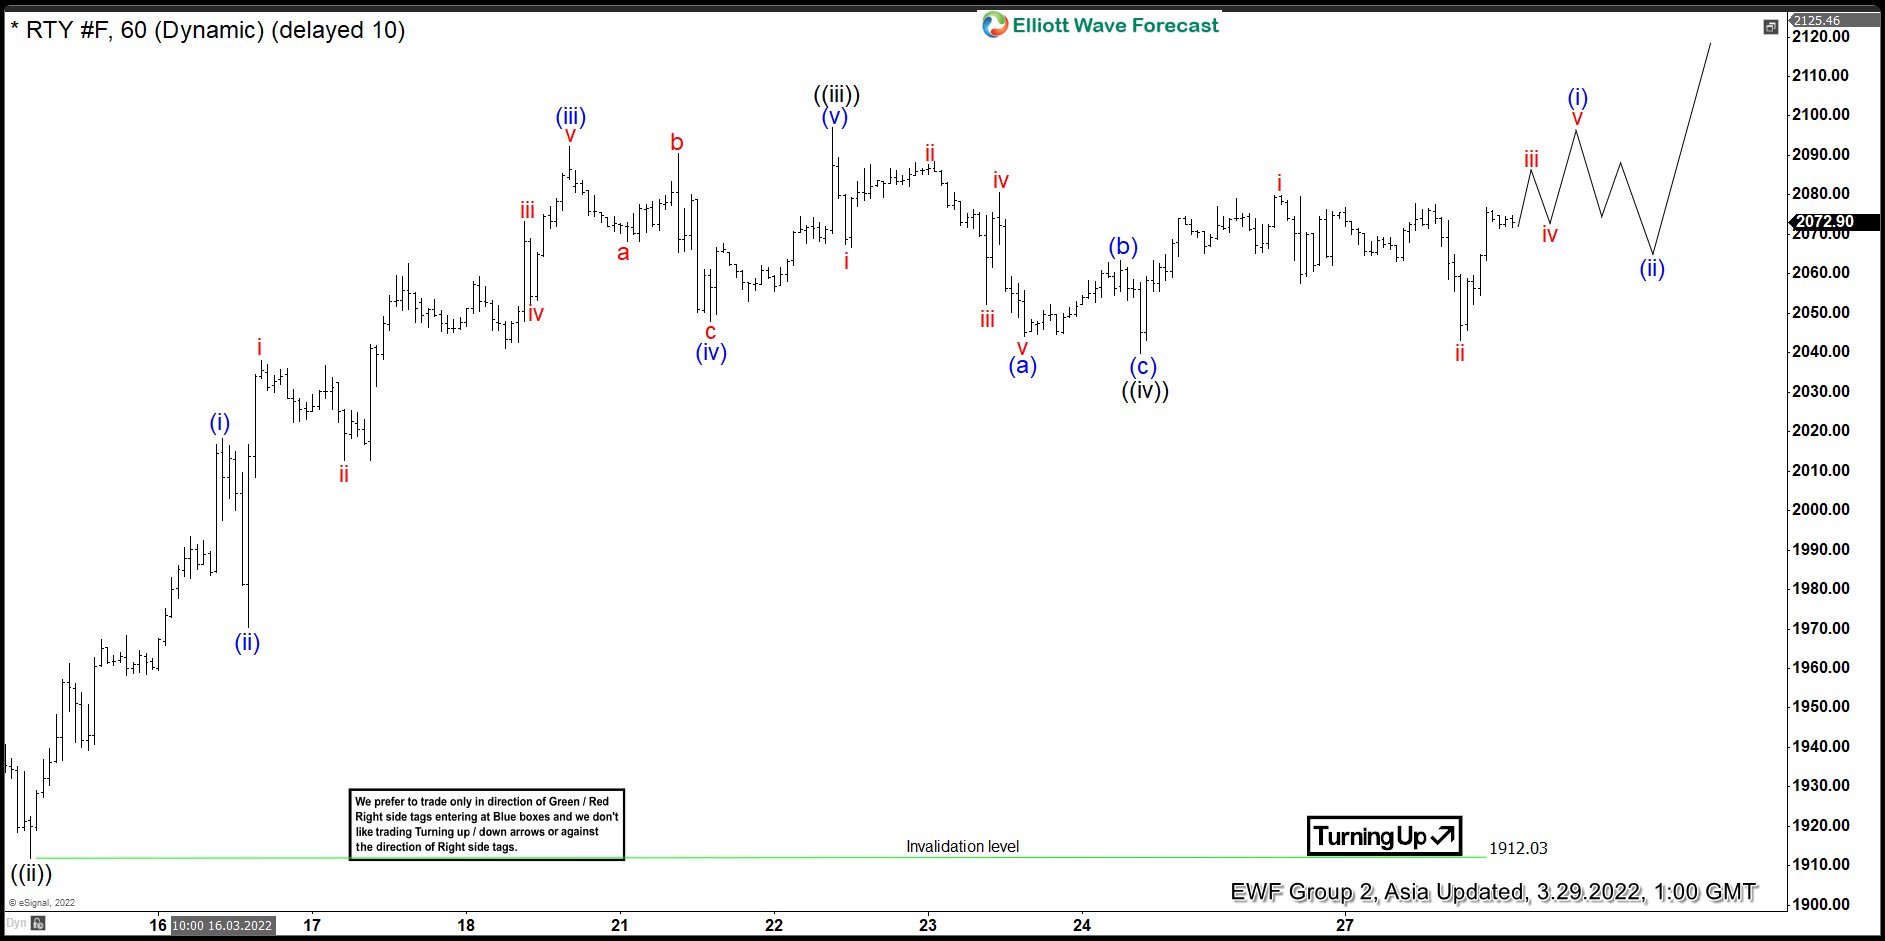 Elliott Wave View: Russell Futures (RTY) Looking to End 5 Waves